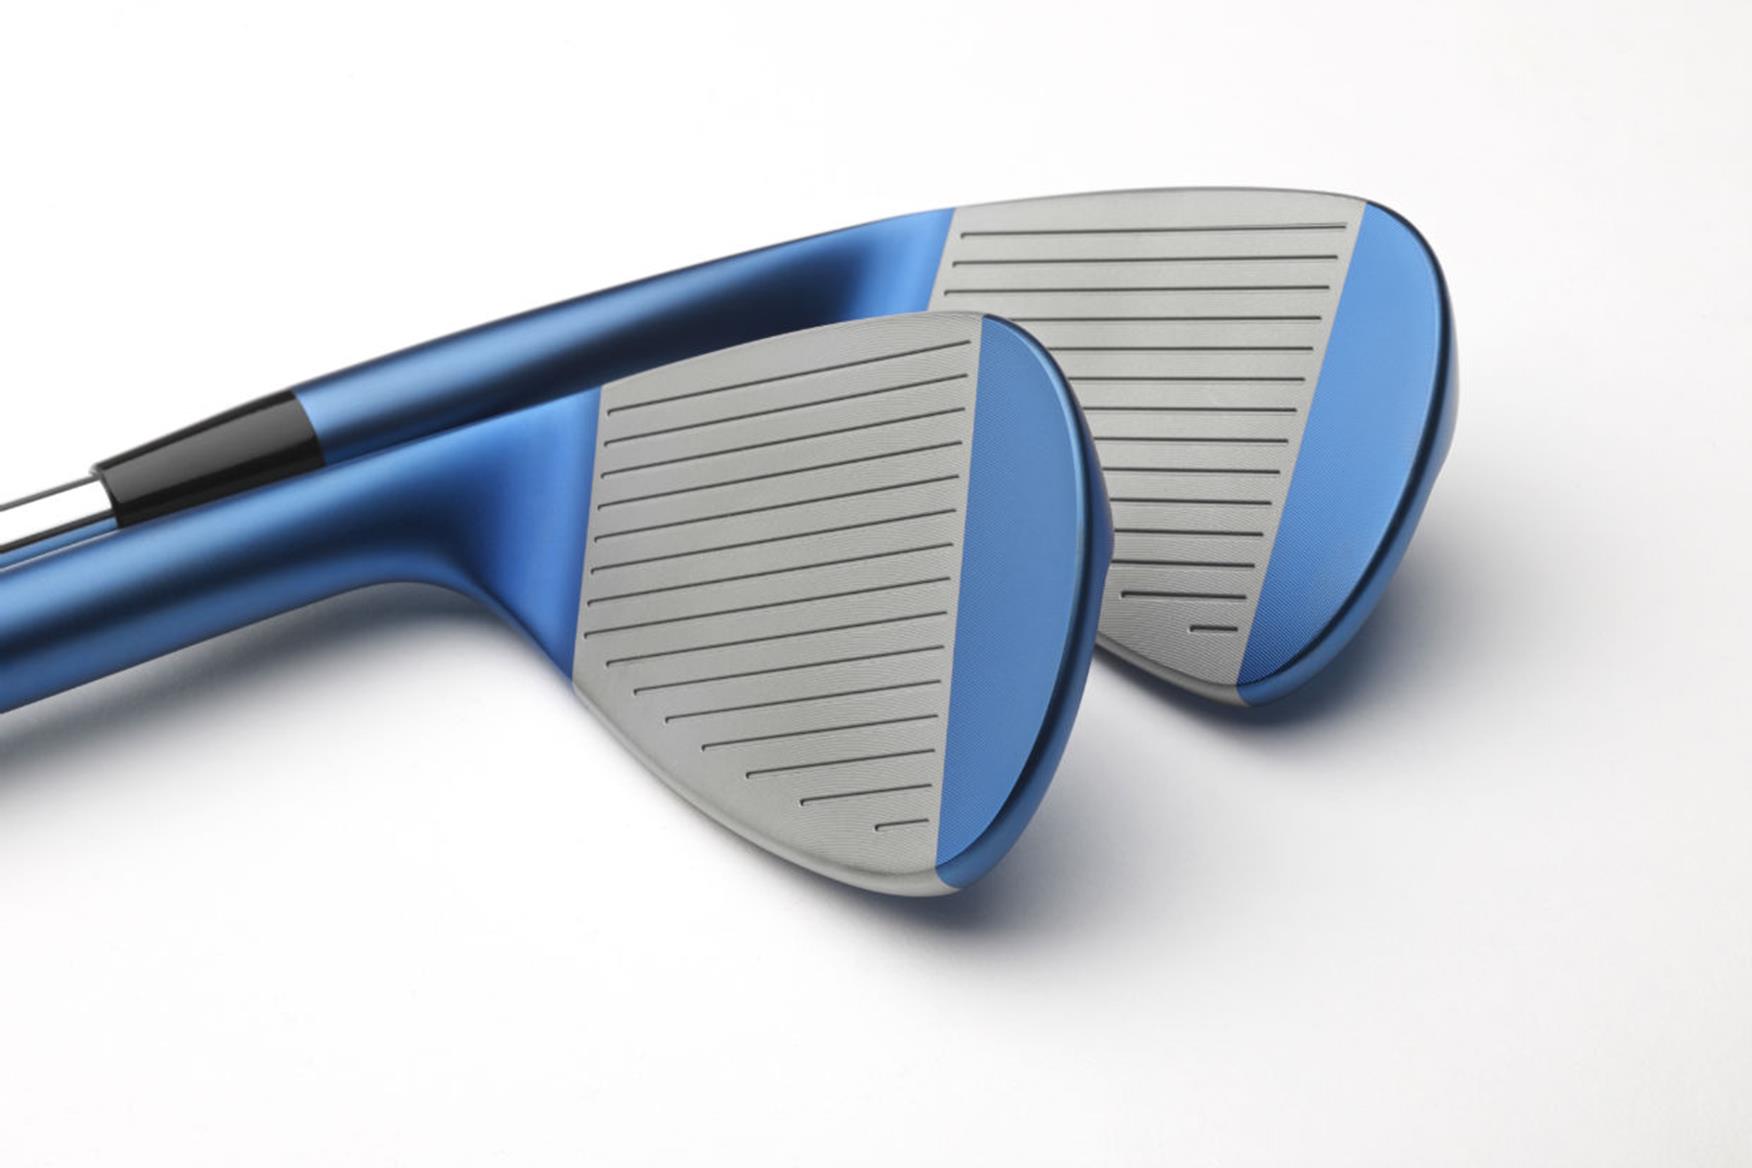 mizuno t7 blue ion wedge review